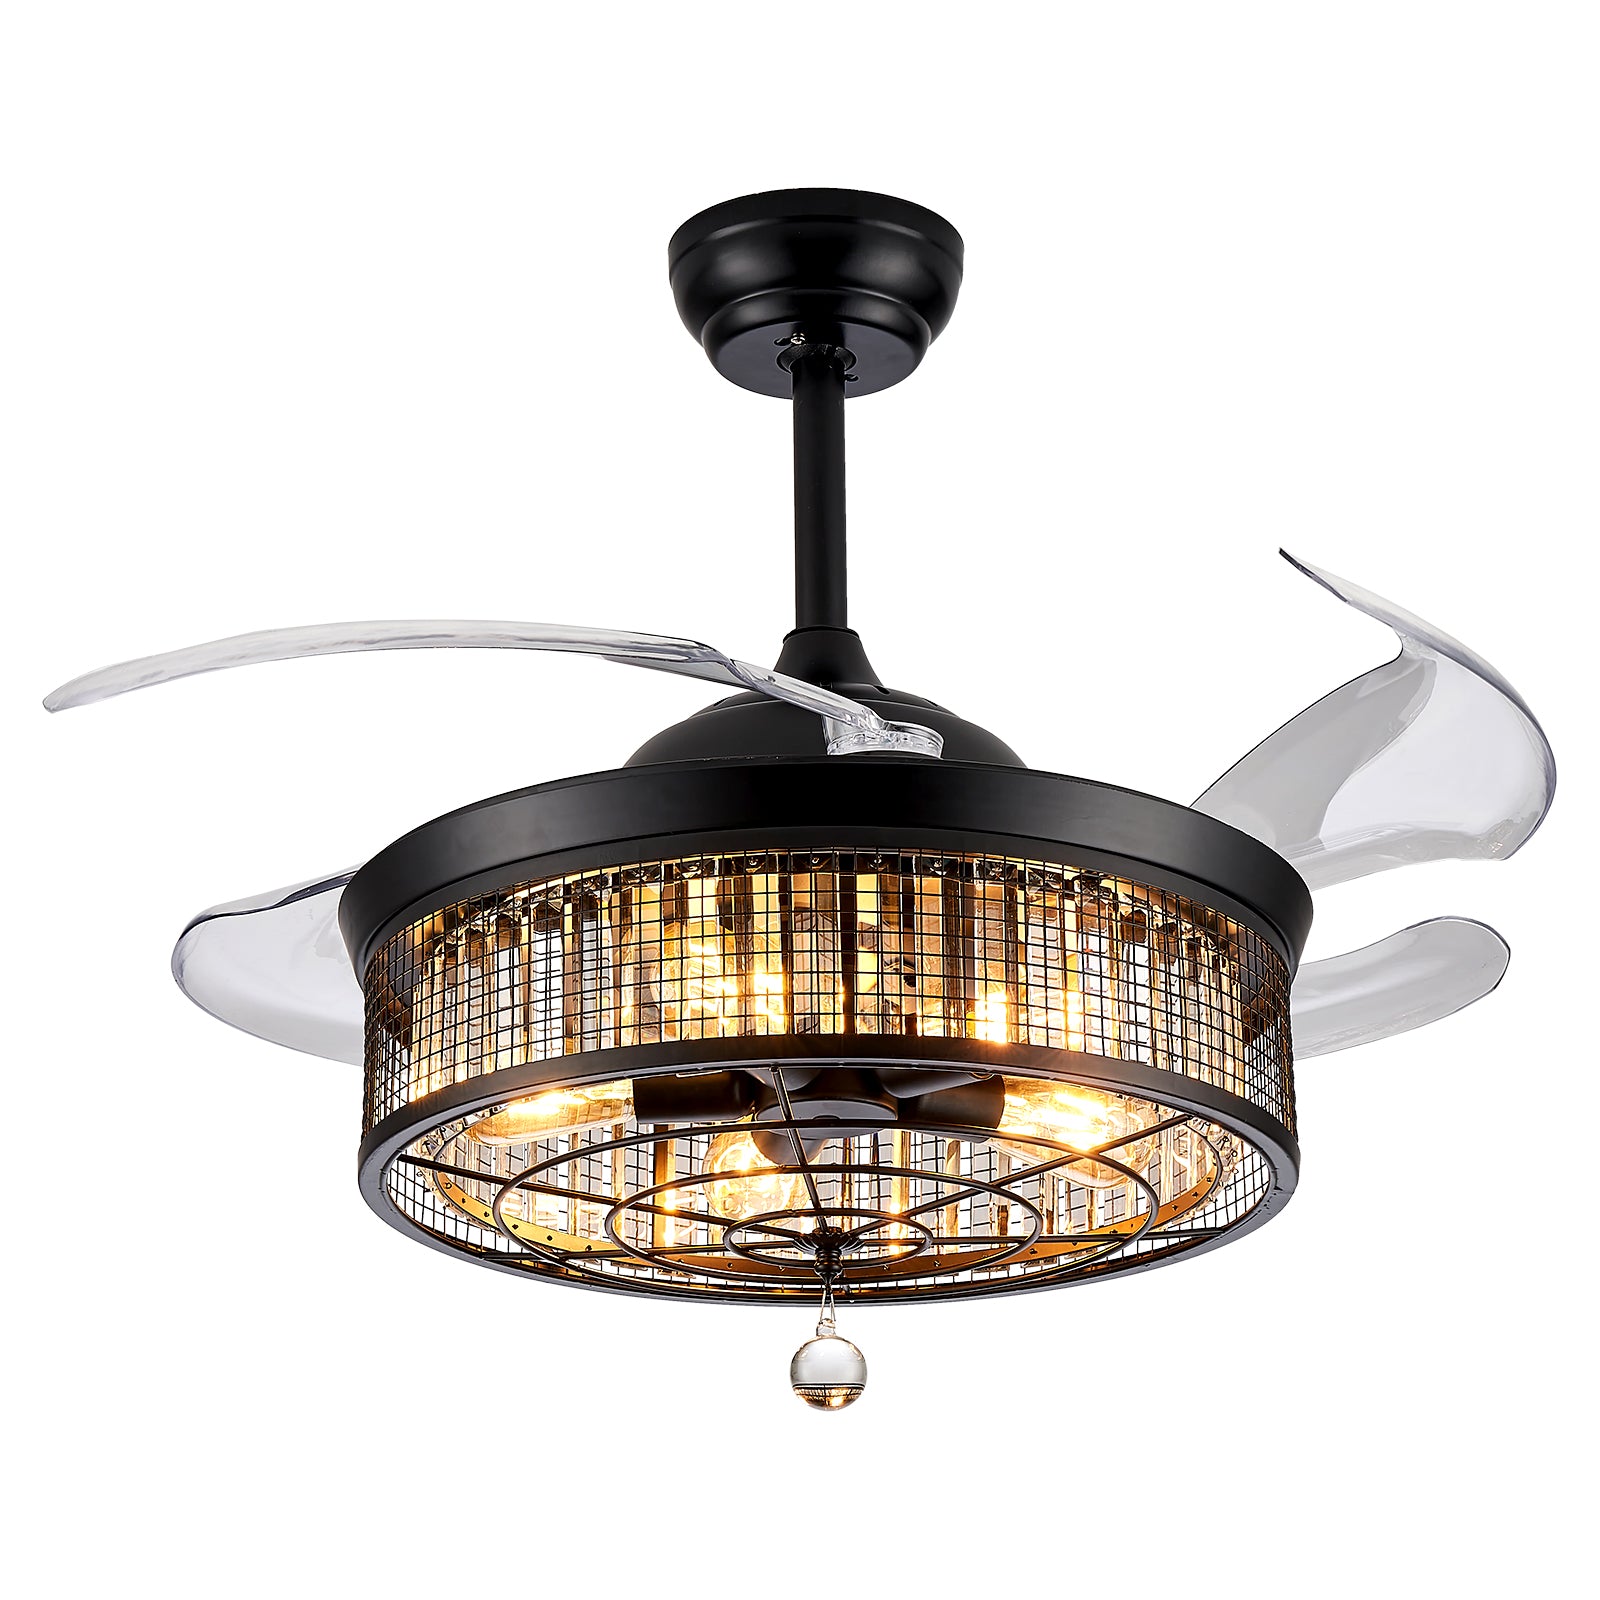 Braya Black Drum Ceiling Fan Light with Clear Blades: Reverse, Timer, Natural Wind, 30W